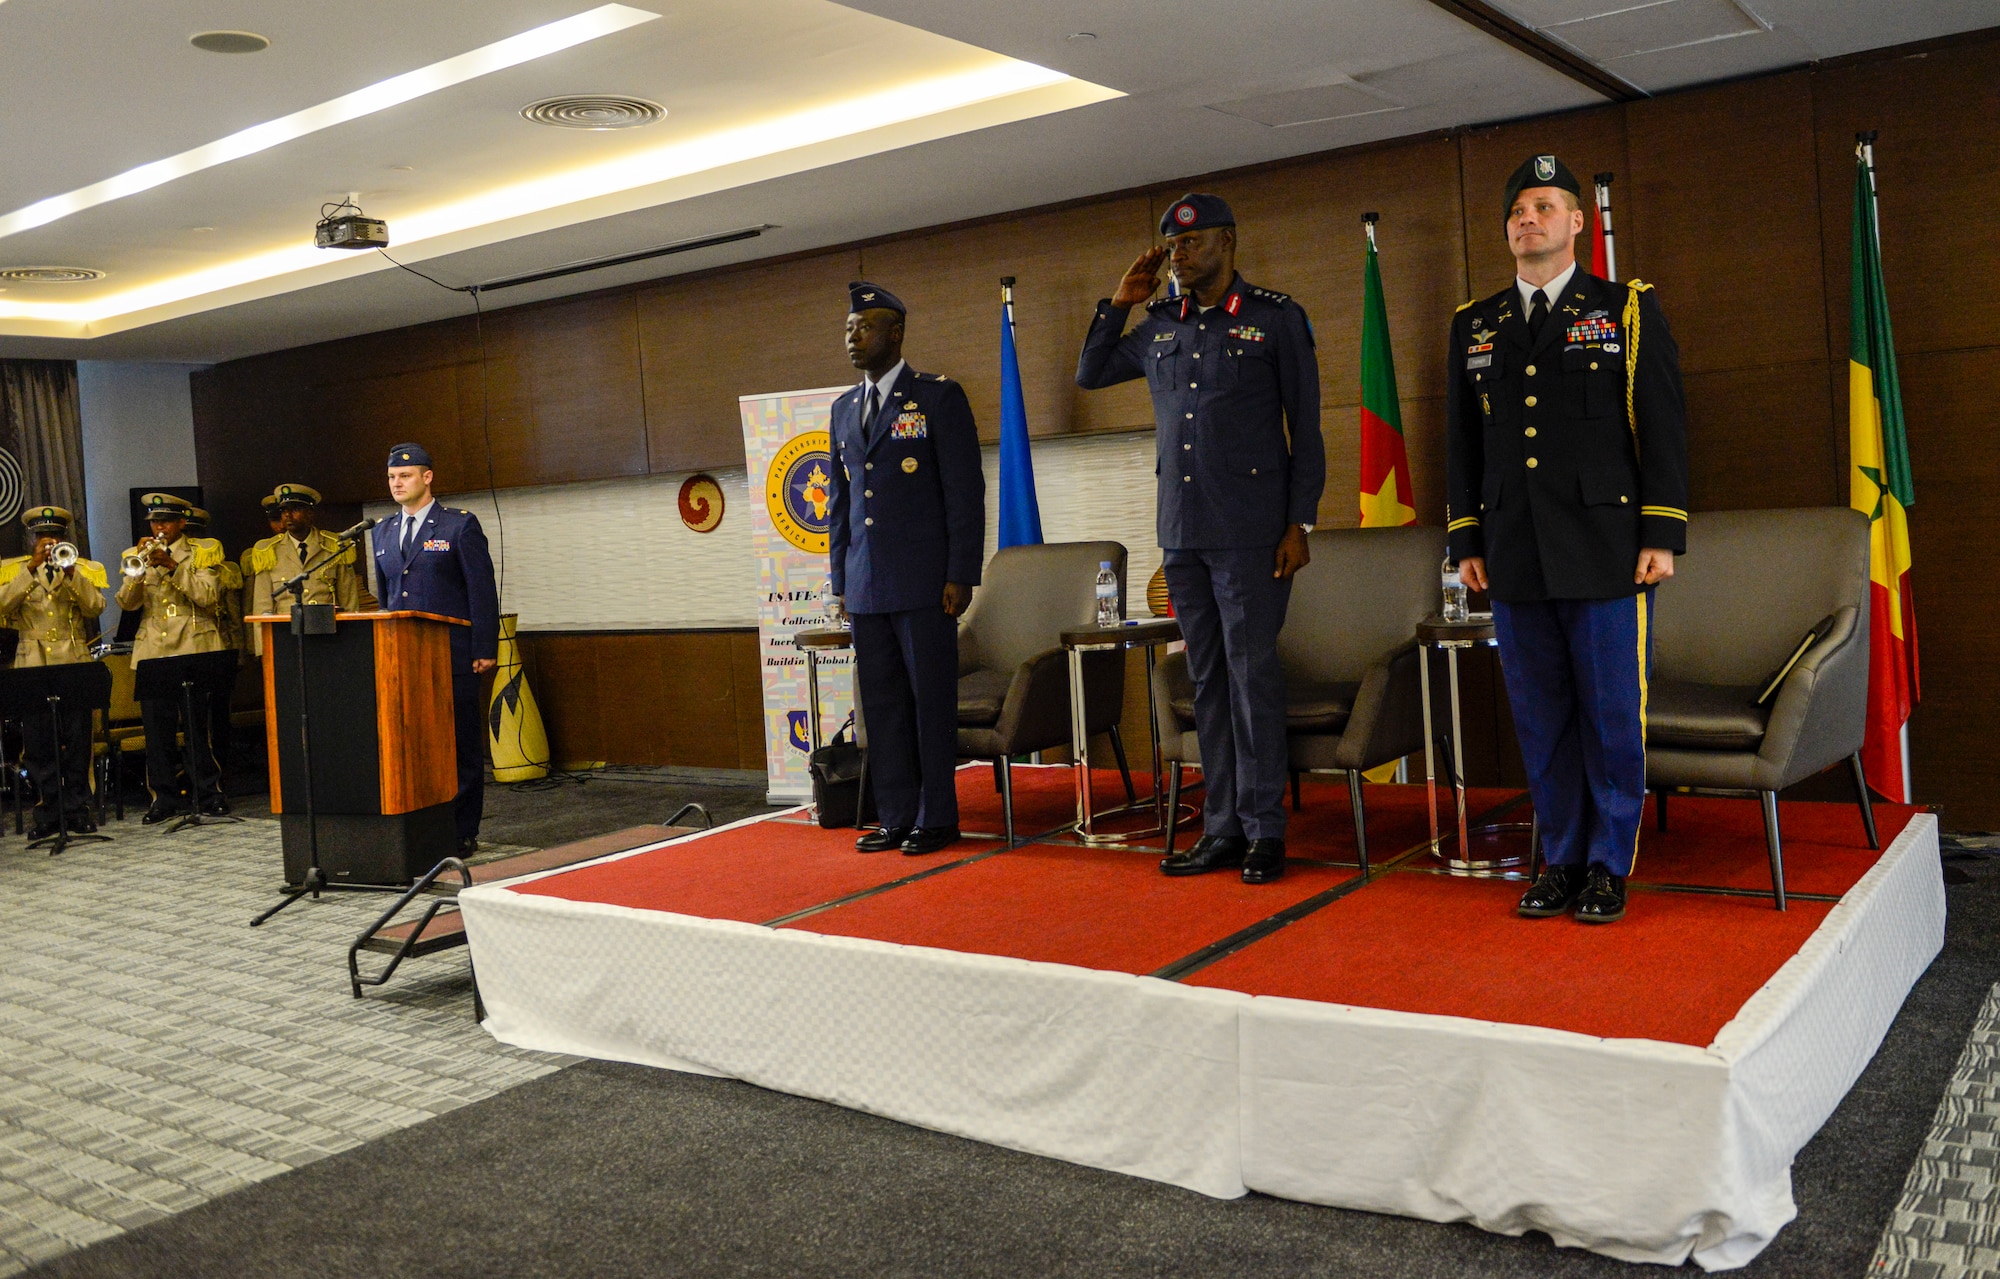 Rwanda Air Force Air Chief Maj. Gen. Charles Karamba, center, is joined on stage by representatives from U.S. Air Forces in Europe-Air Forces Africa and the U.S. Embassy in Kigali during the African Partnership Flight Rwanda opening ceremony in Kigali, Rwanda, March 4, 2019. The APF program is intended to build strong, transparent partnerships that enhance regional stability and security. APF Rwanda's focus is on sharing best practices for flight, ground, and weapon safety. (U.S. Air Force photo by Tech. Sgt. Timothy Moore)